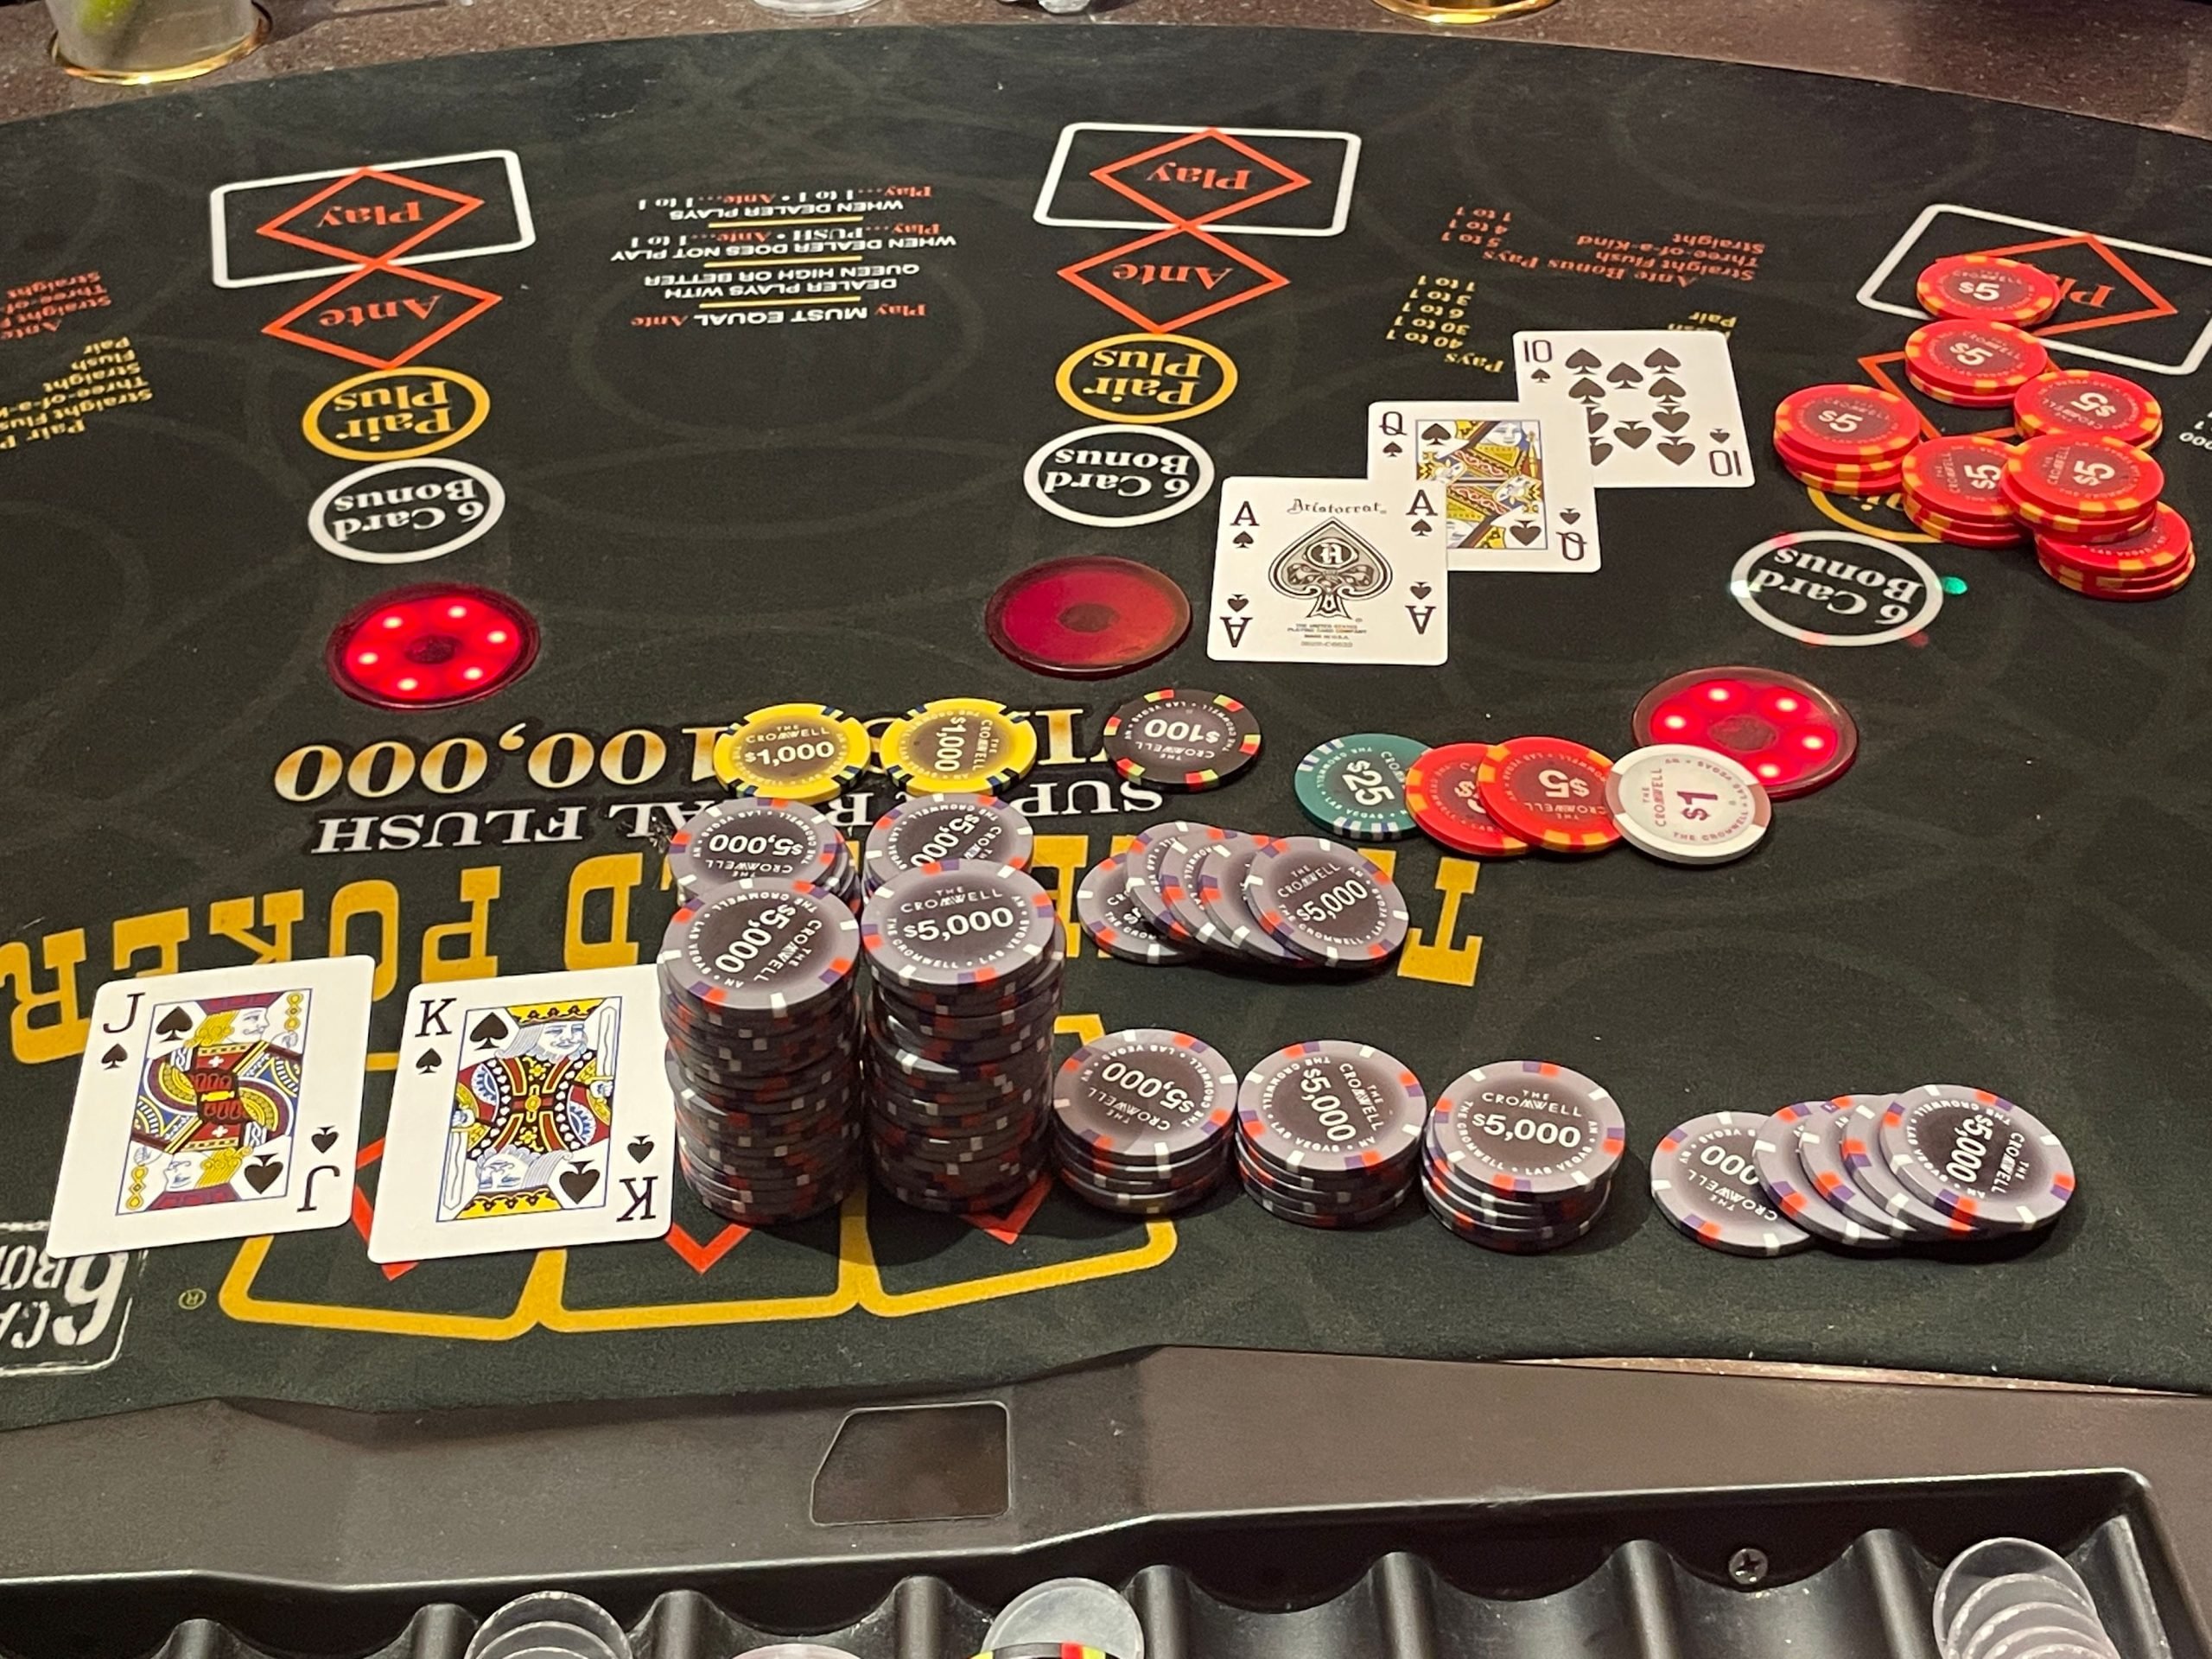 Jackpot: Lucky Player Wins 7K at The Cromwell in Las Vegas